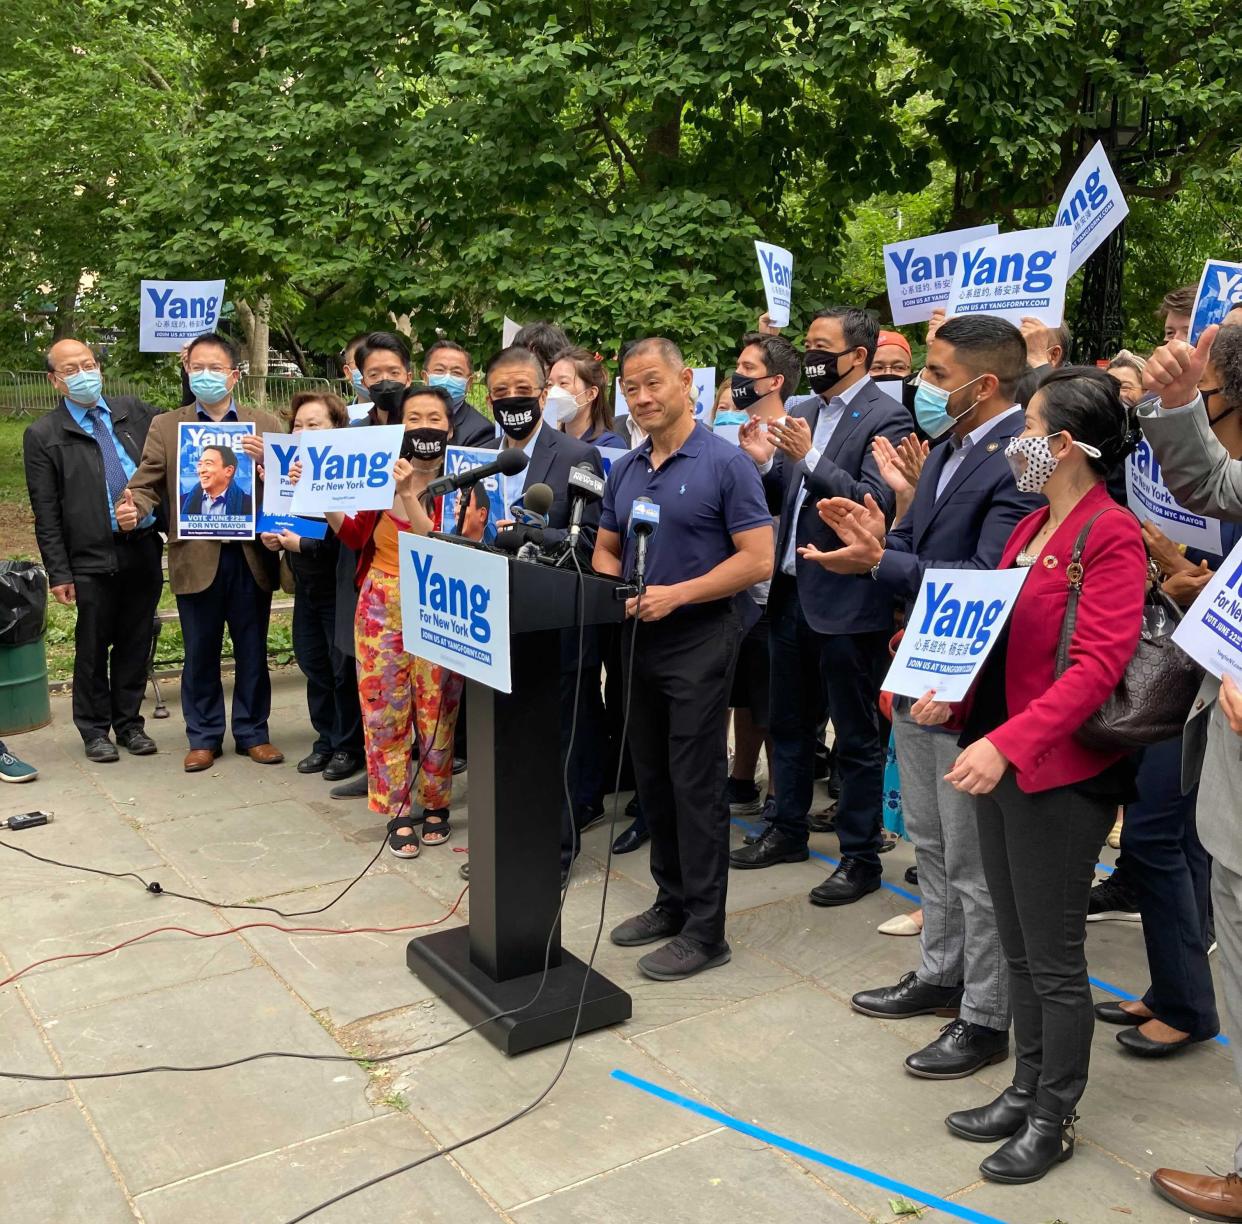 New York State Sen. John Liu (D-Queen) at the podium (center) and New York City mayoral candidate Andrew Yang standing behind Liu